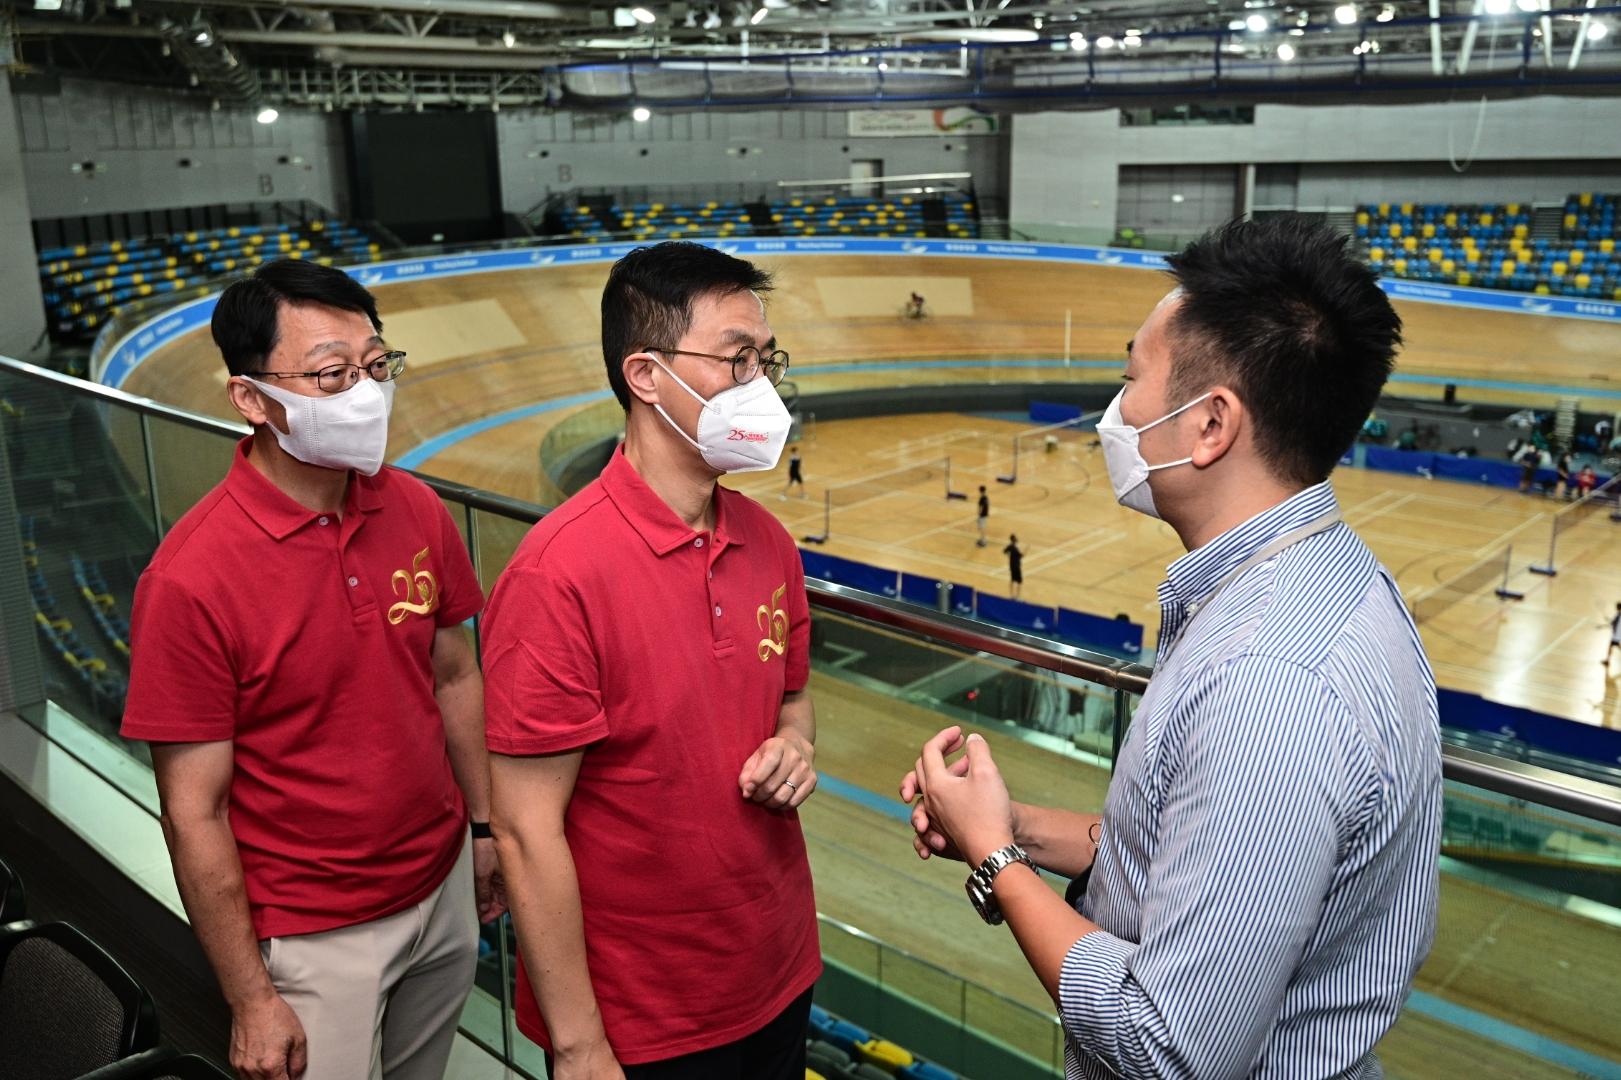 The Secretary for Culture, Sports and Tourism, Mr Kevin Yeung, visited several leisure facilities under the Leisure and Cultural Services Department today (July 1). Photo shows Mr Yeung (second right) being briefed by staff on the operations of the Hong Kong Velodrome.